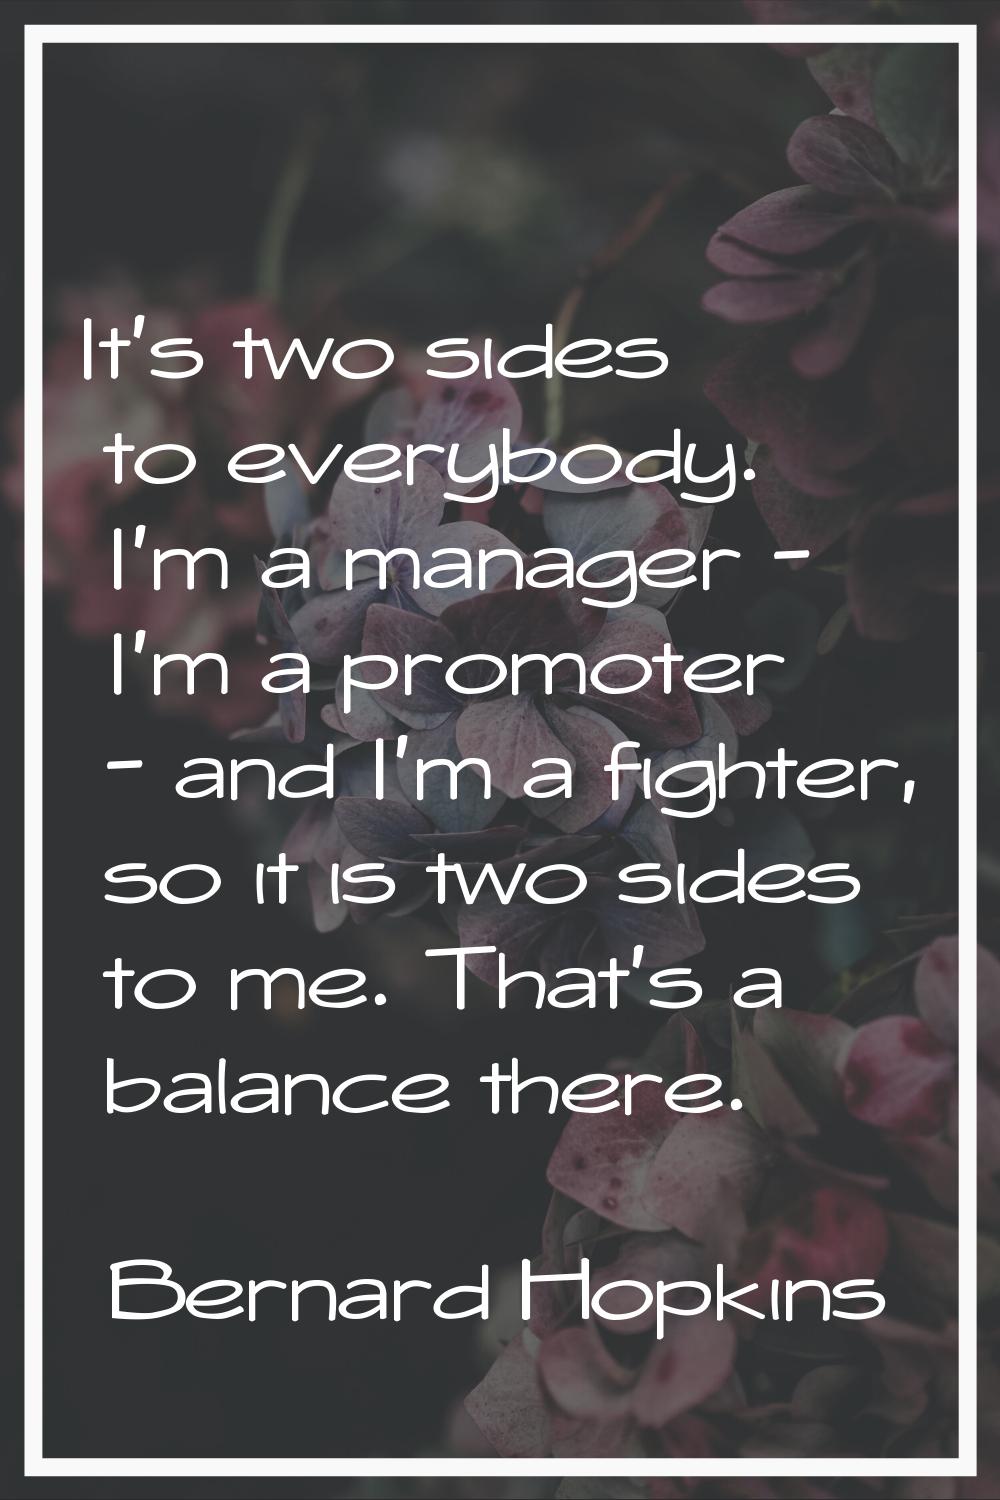 It's two sides to everybody. I'm a manager - I'm a promoter - and I'm a fighter, so it is two sides